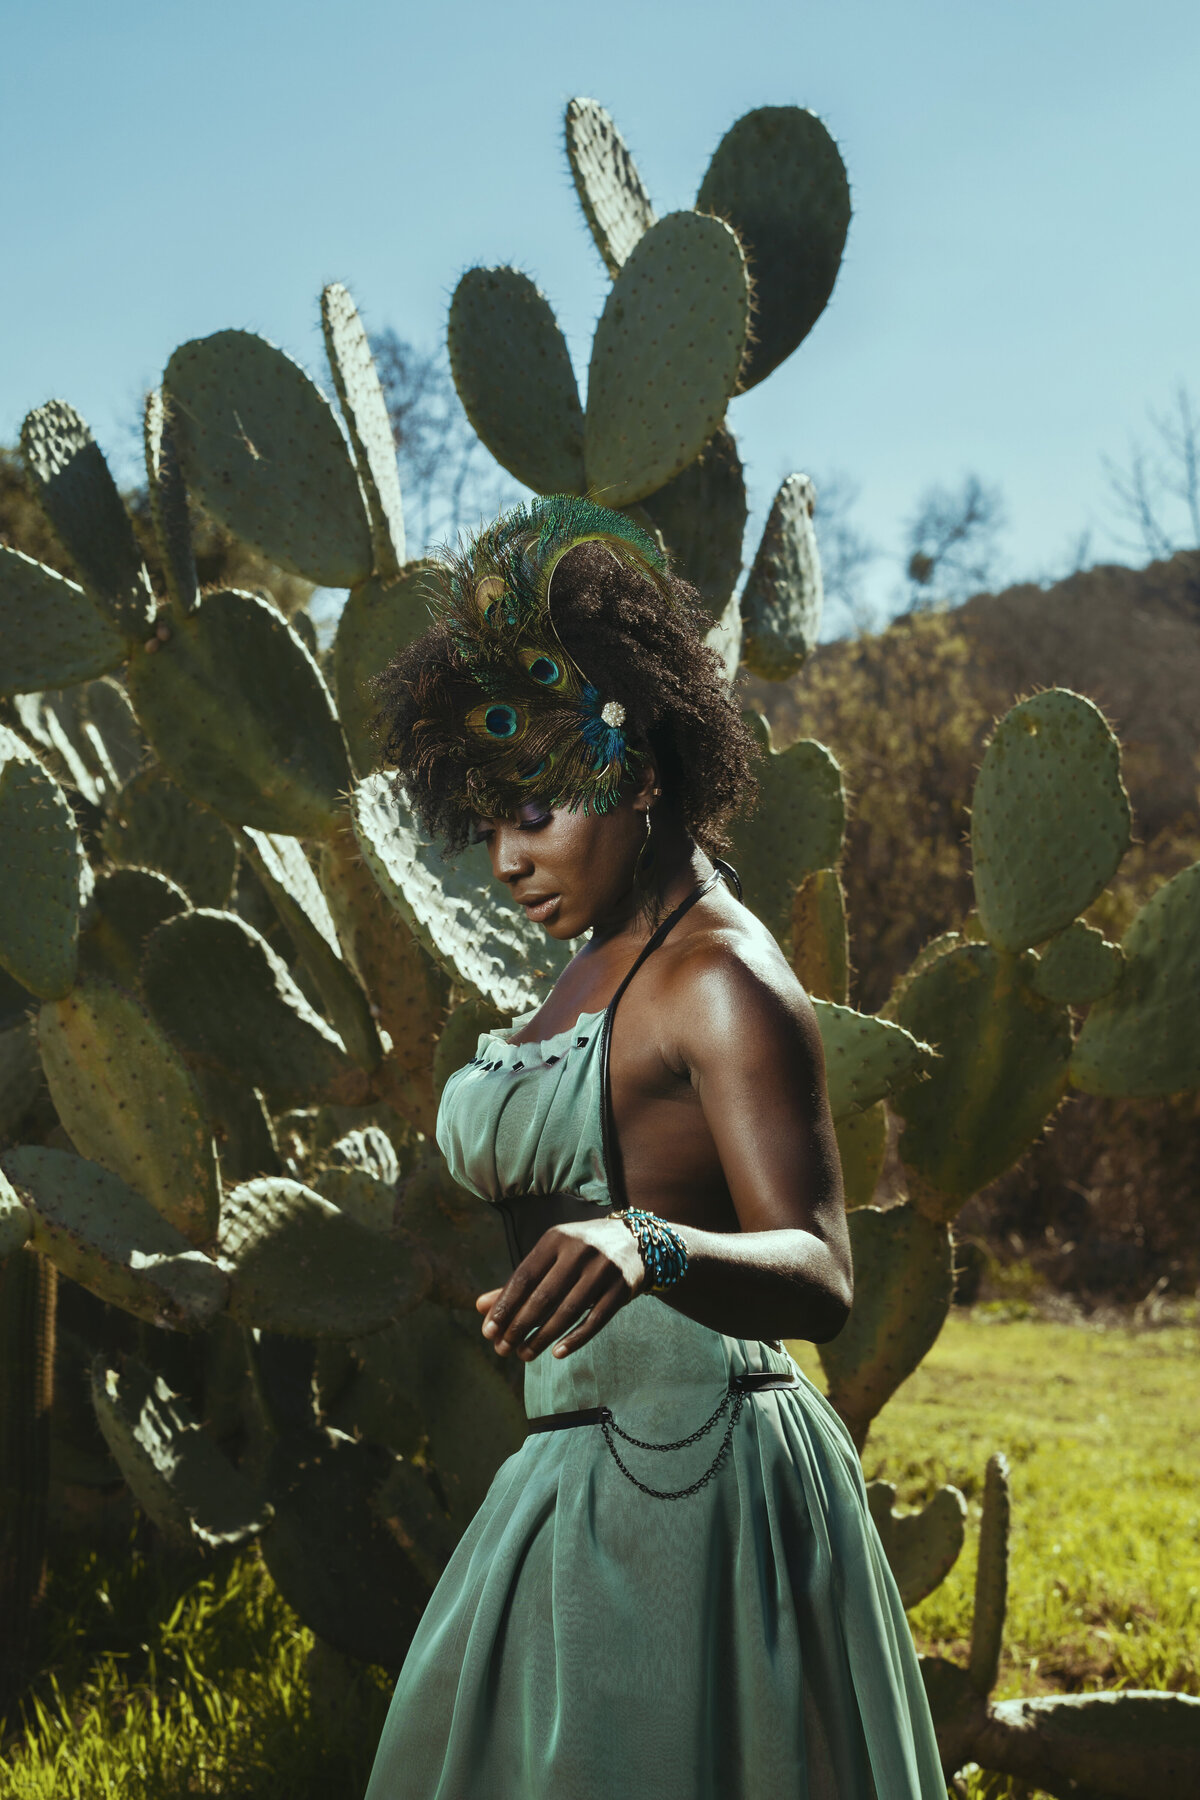 Black woman in green out standing in front of cactus